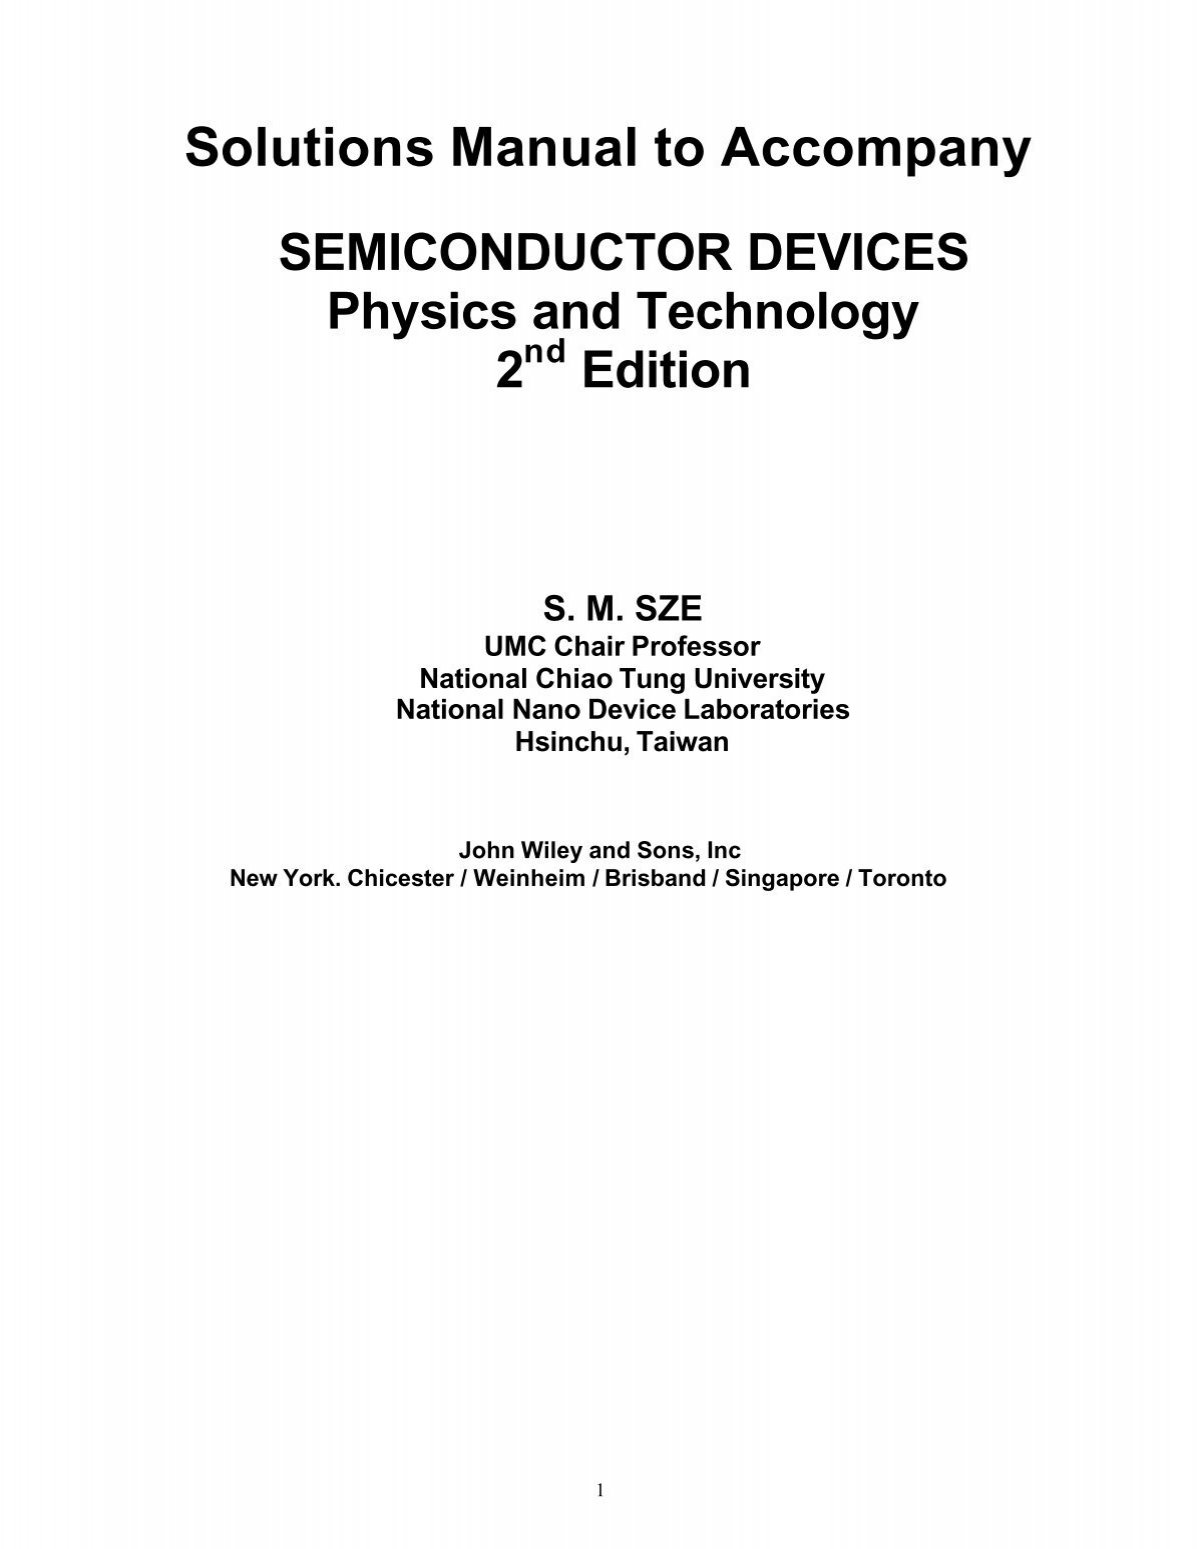 Solutions Manual To Accompany Semiconductor Devices